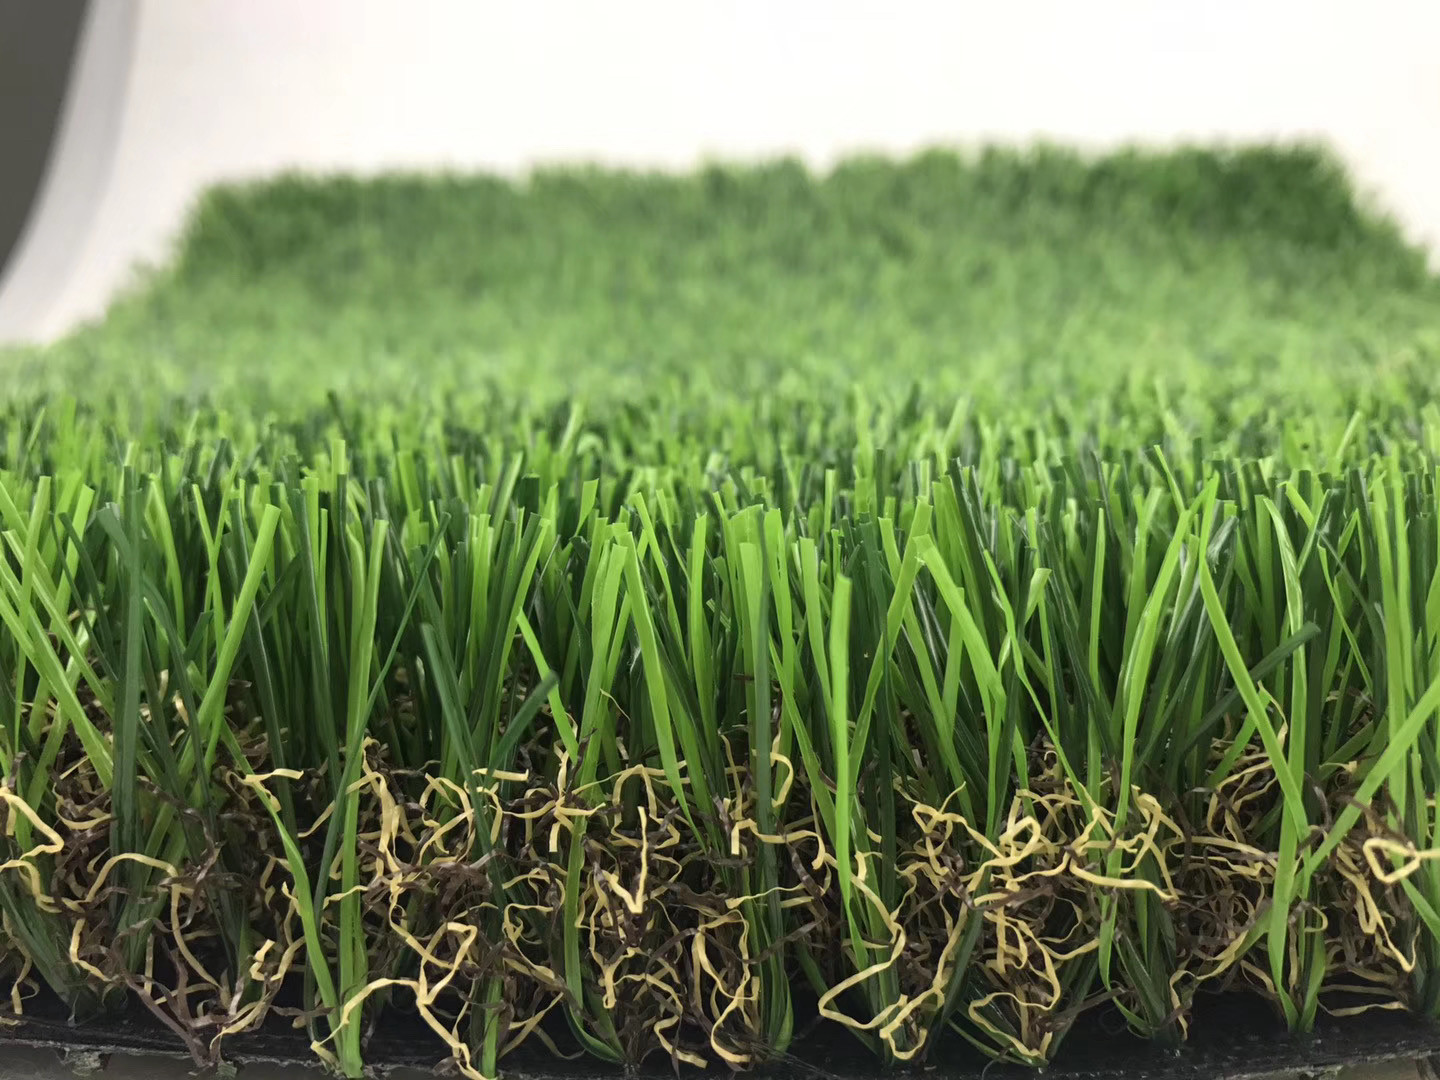 Cheap Environmental Friendly Artificial Turf Grass Superior Resilience Football Field Lawns wholesale